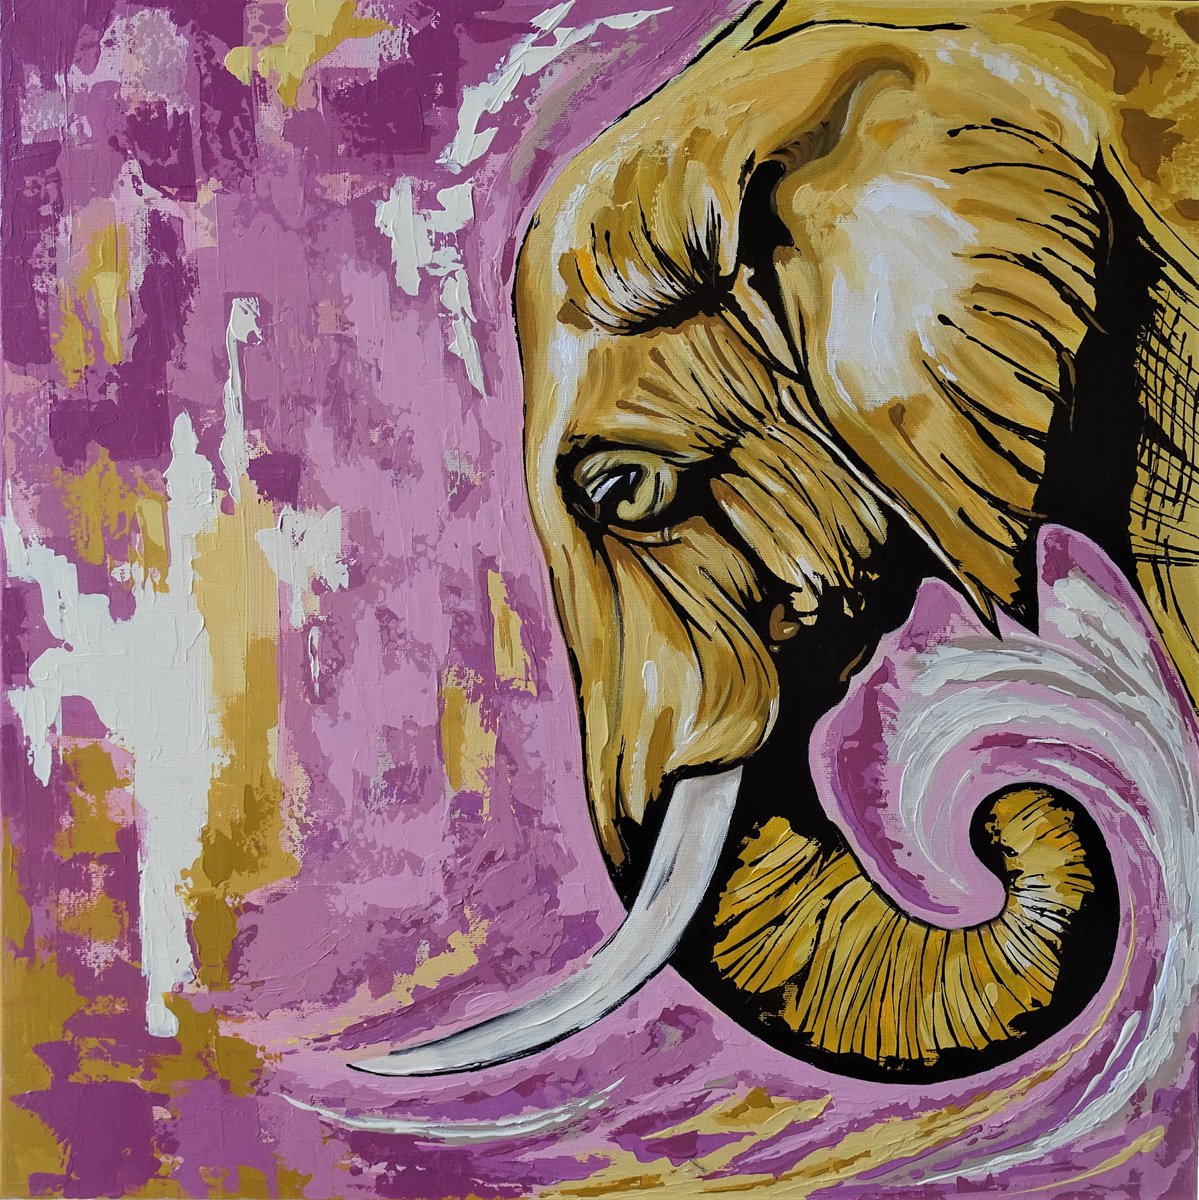 Abstract elephant by Livien Rozen